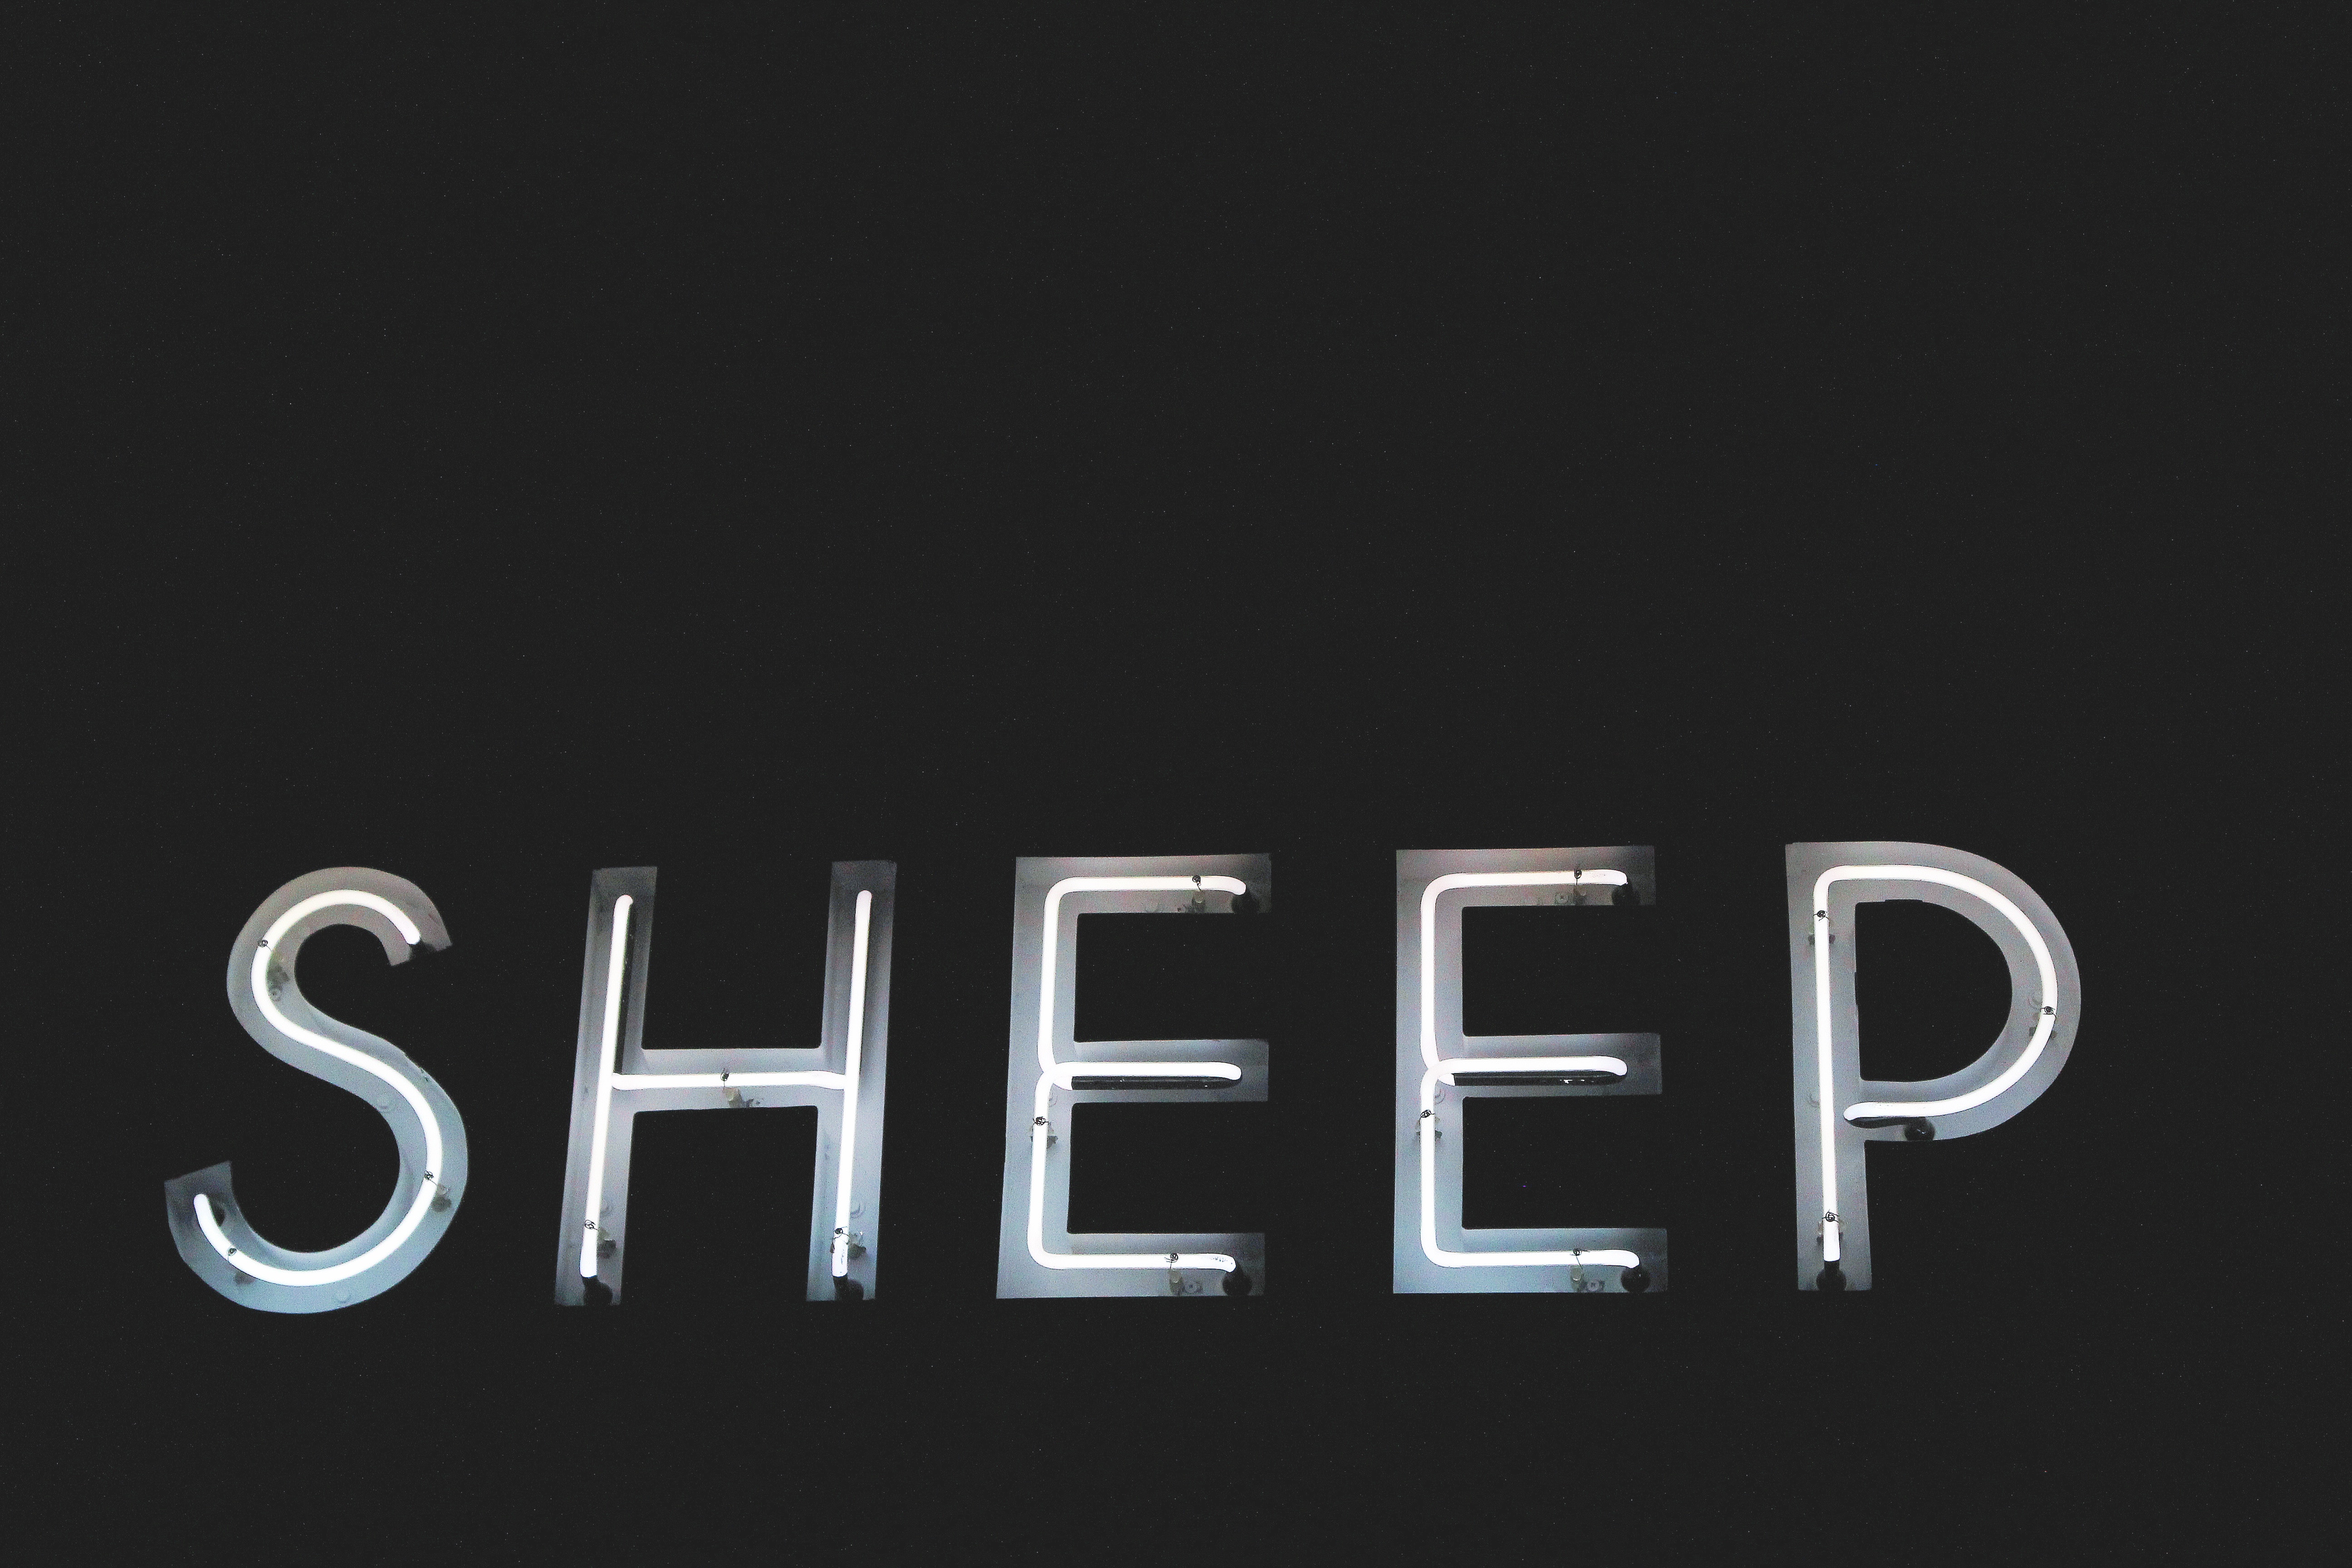 A picture of sheep in neon